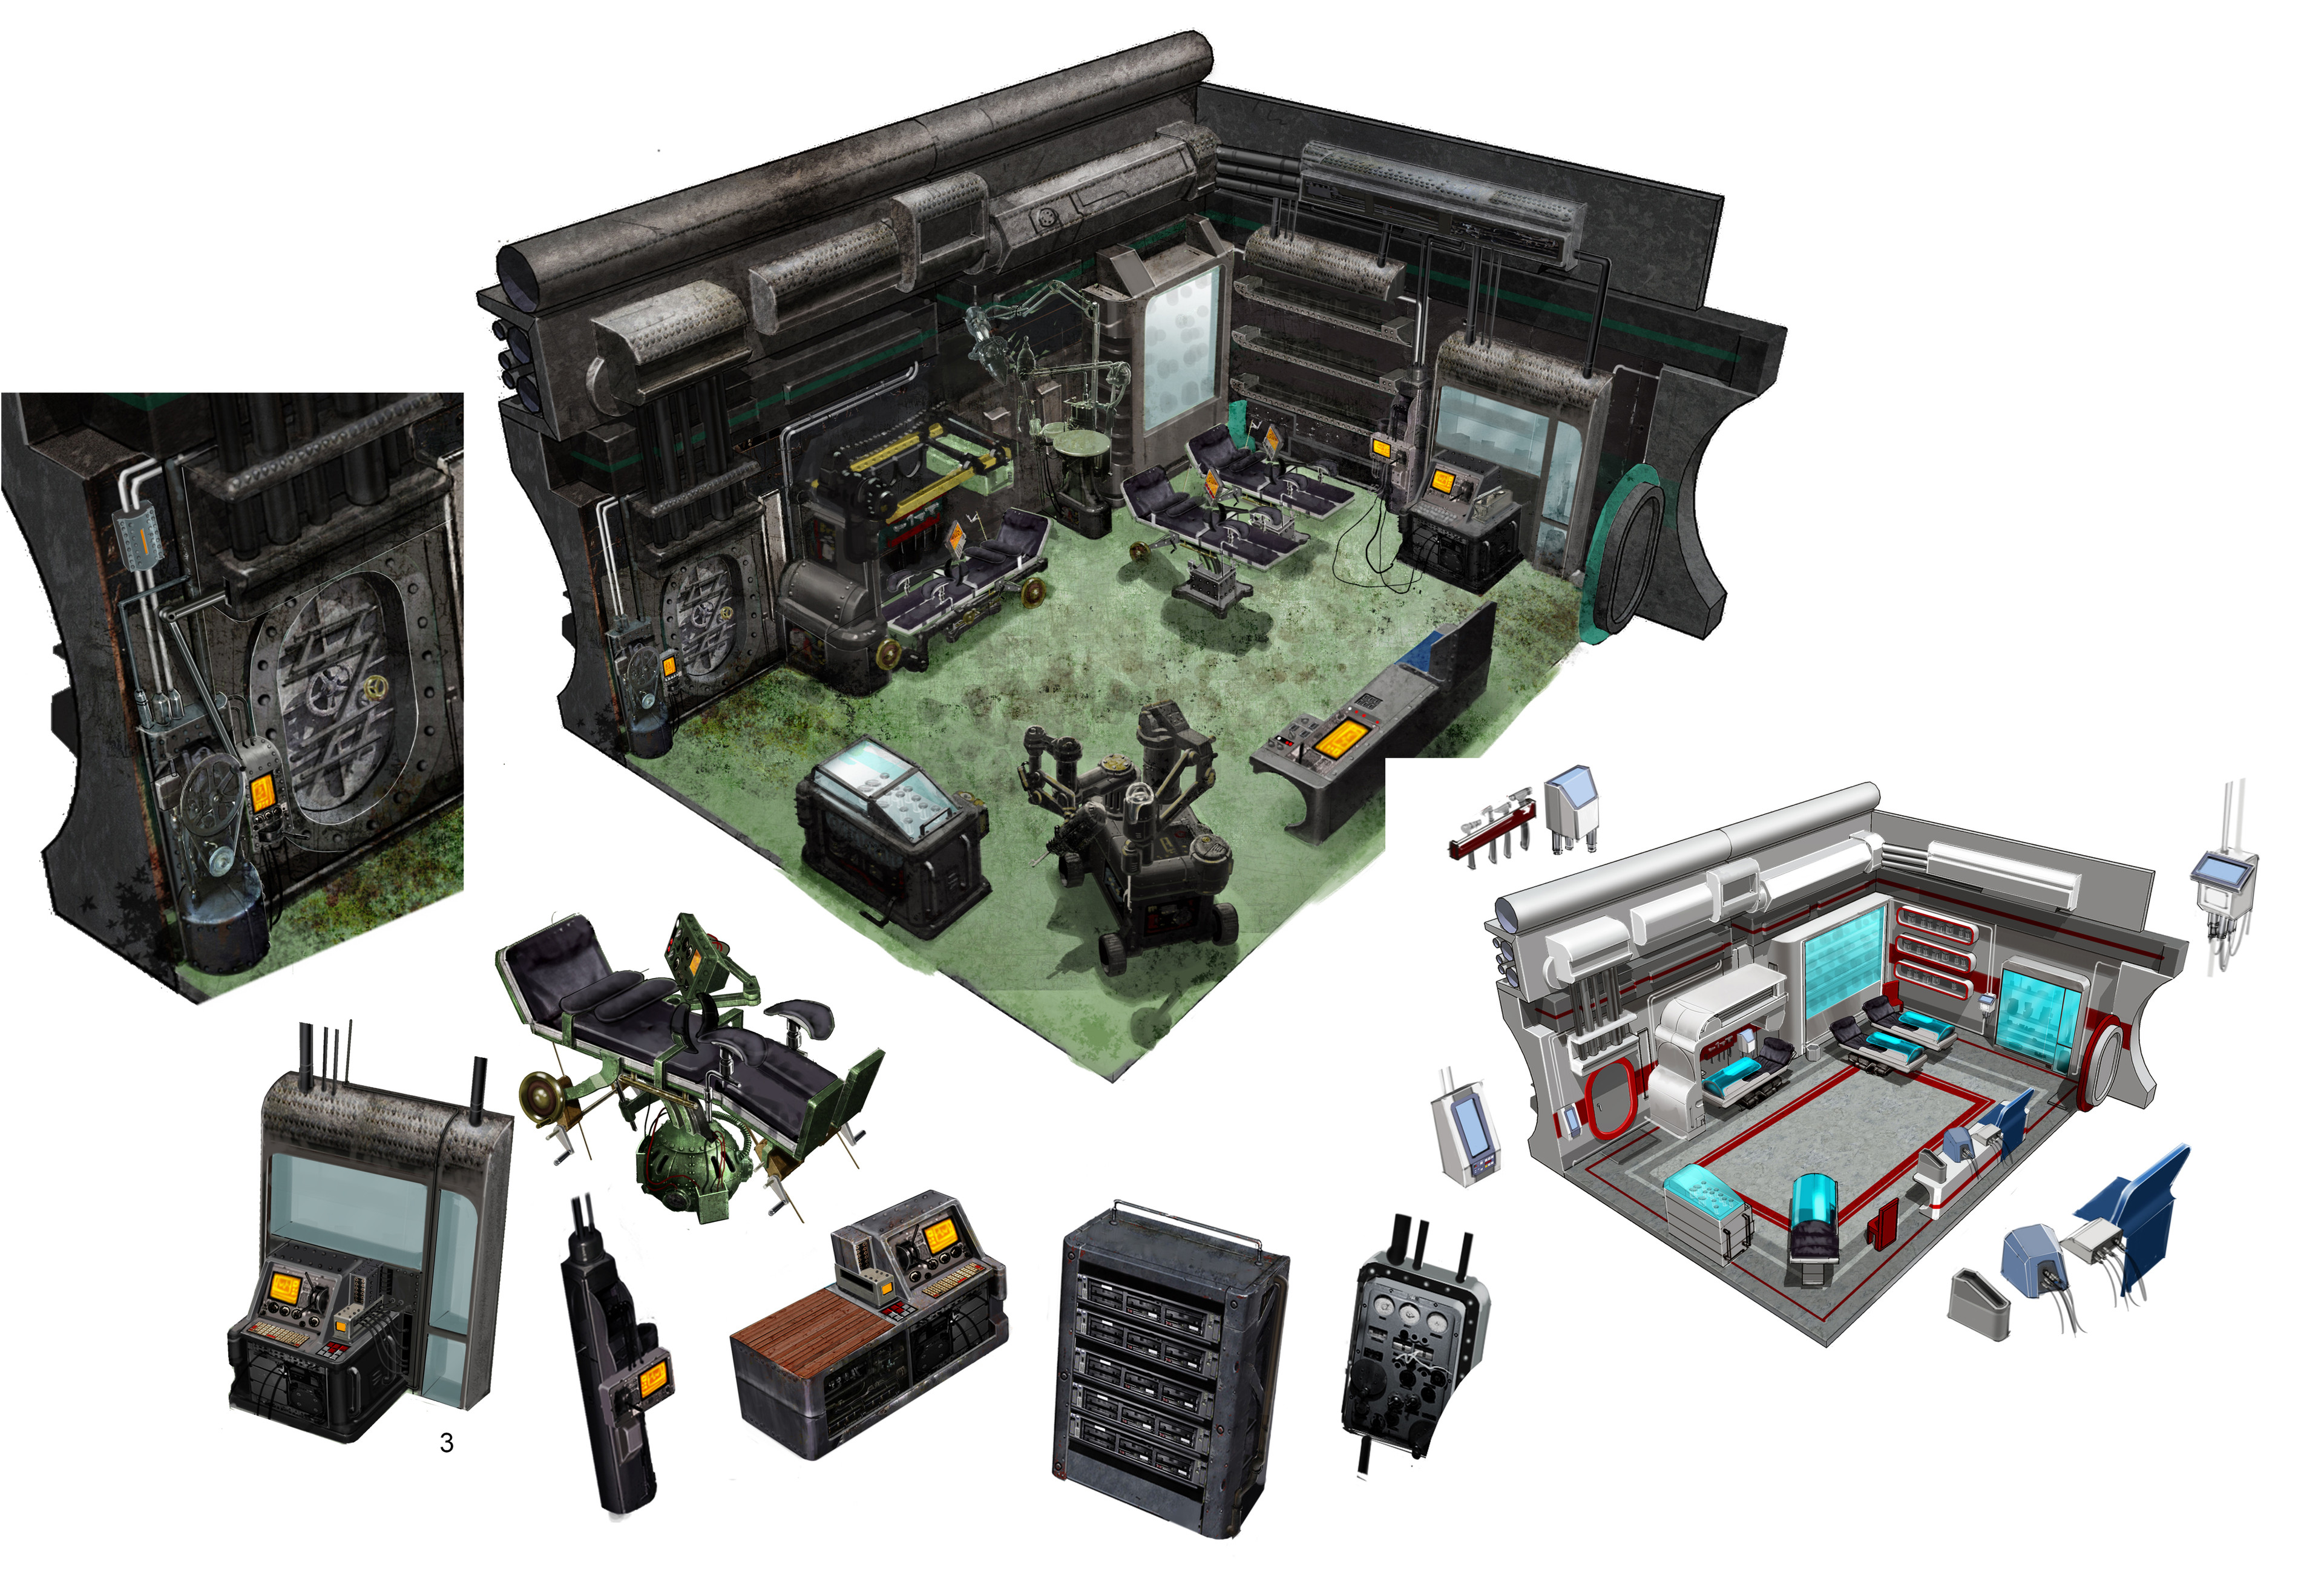 At Blind Squirrel we did some contract concept work for the game Evolve by Turtle Rock Studios.  Medical room design